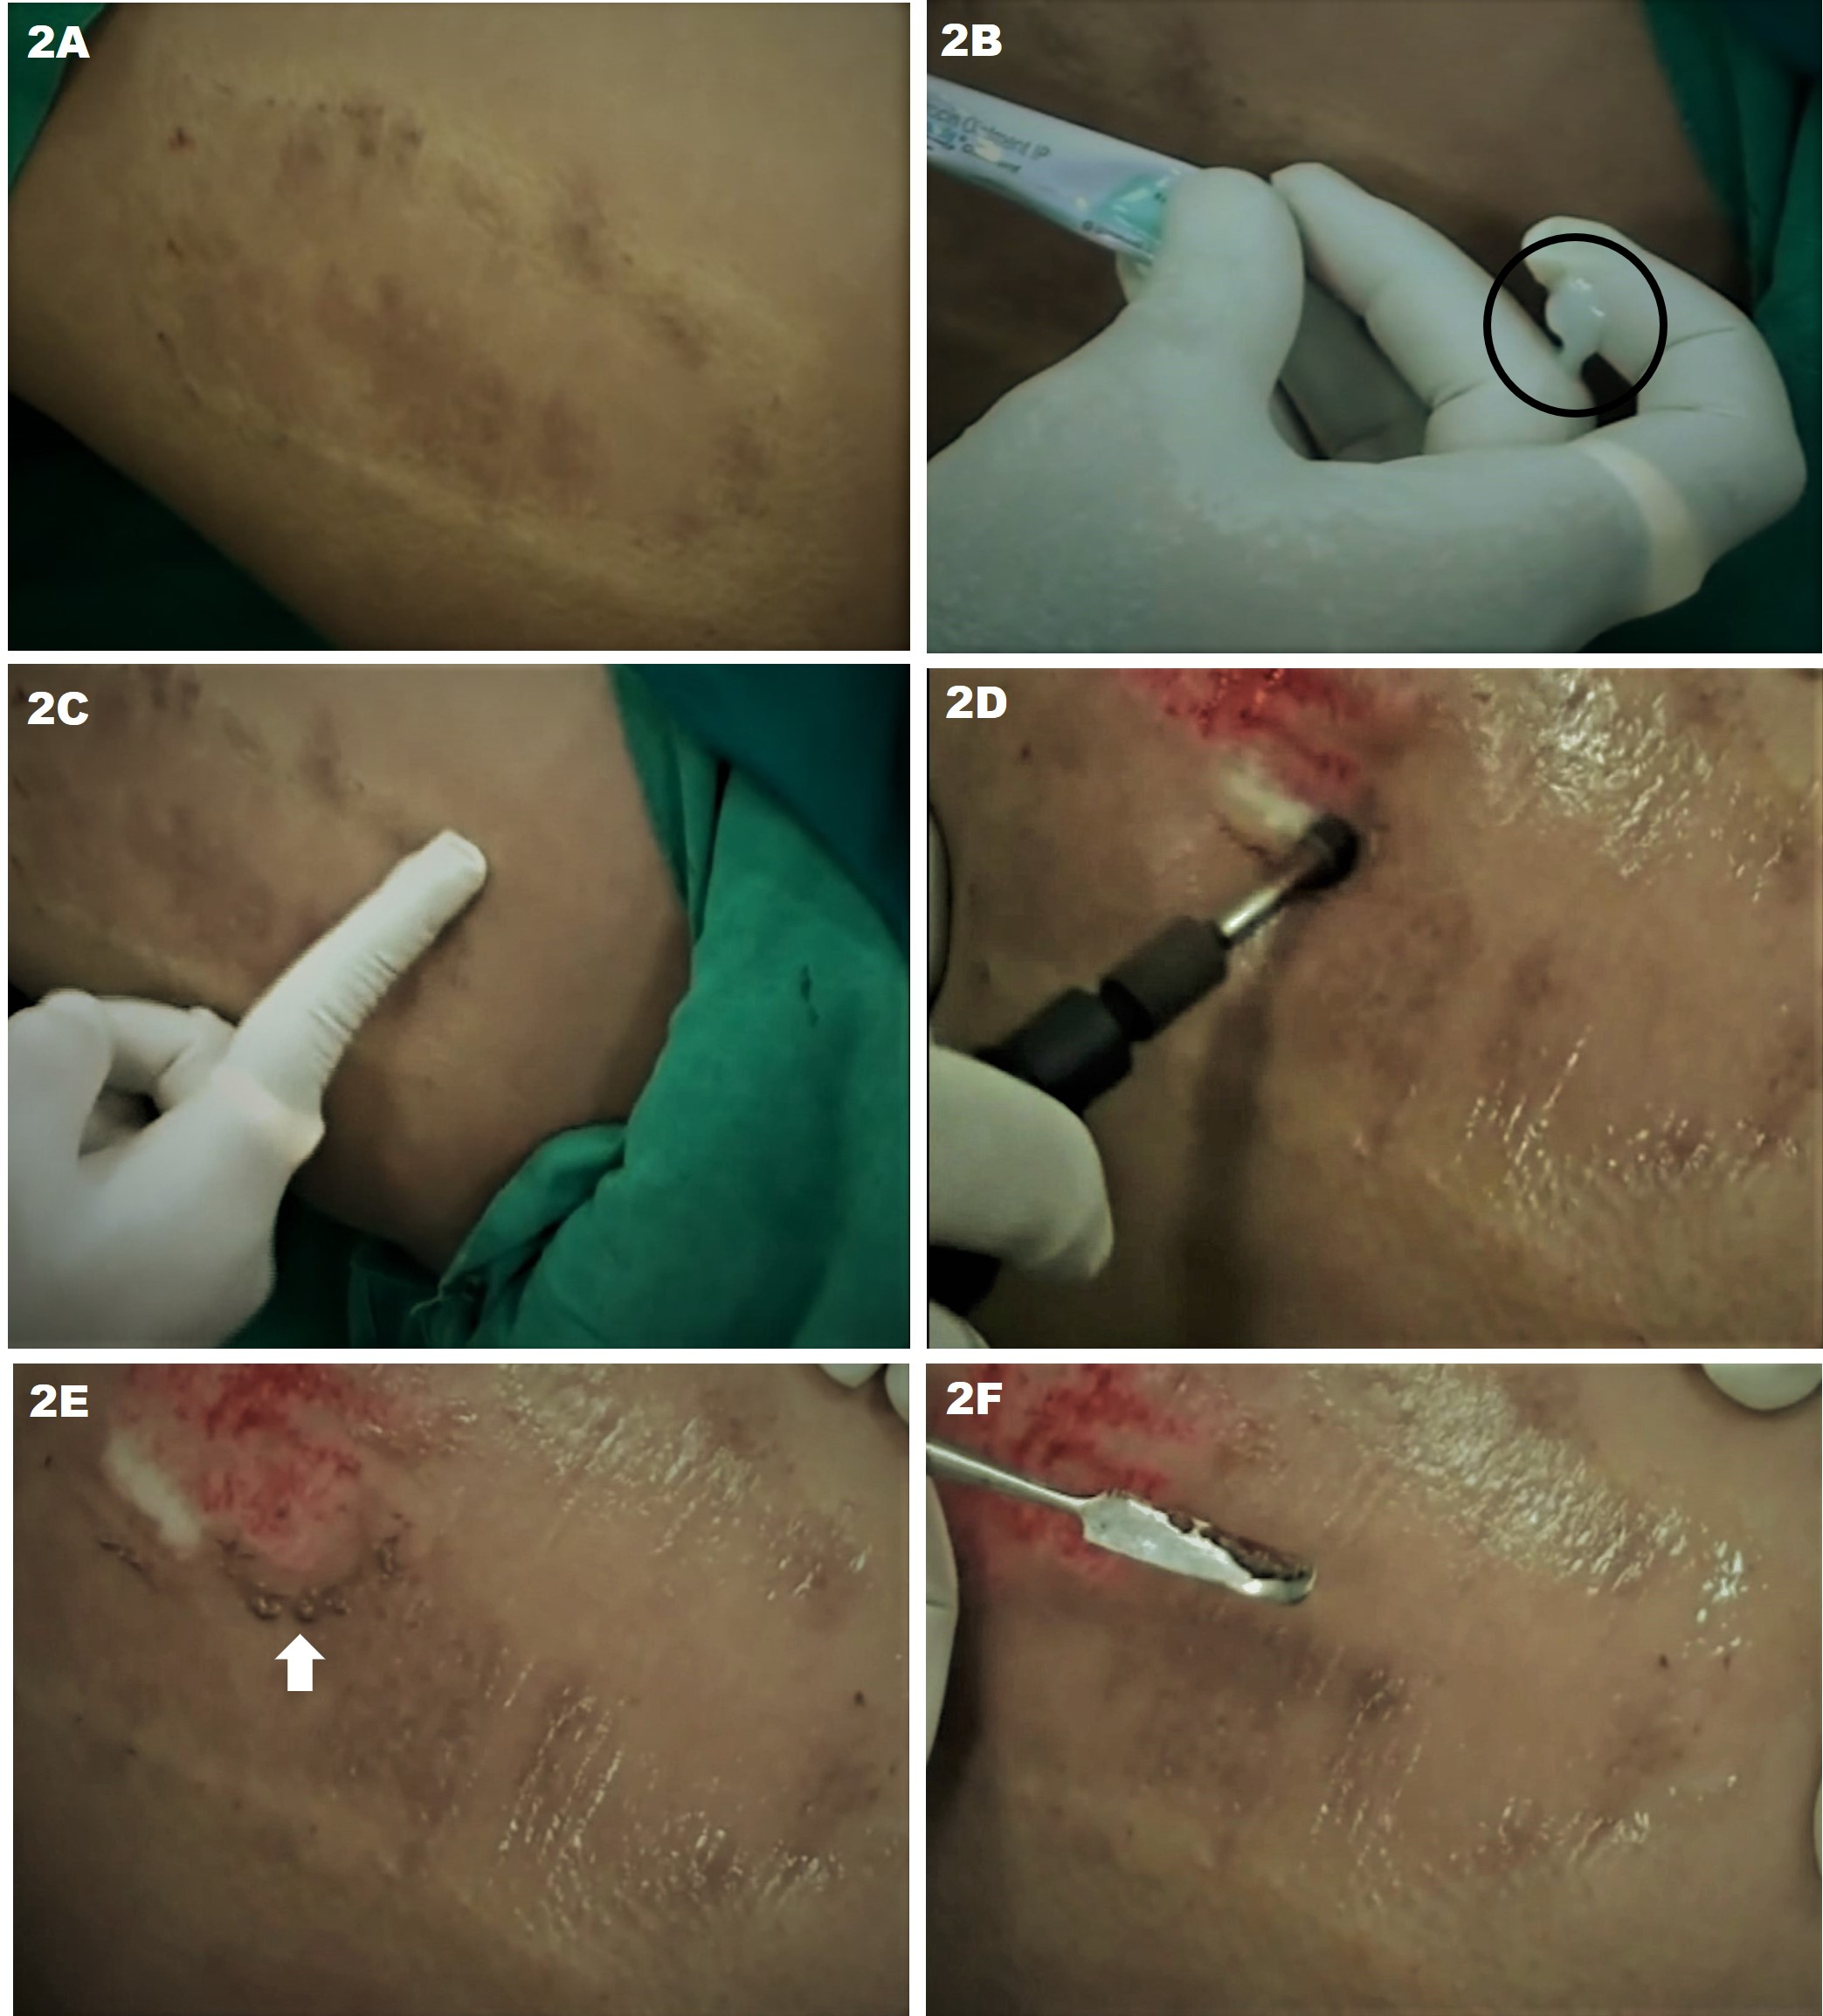 Figure 2. JODHPUR TECHNIQUE (JT) - Depiction of harvesting the graft from the donor site, (A) Baseline clinical image of the donor site, a post-STSG grafted area showing the uneven texture (often encountered after STSG). This also shows the advantage of JT, in which a repigmented site can also be used as donor area without the fear of depigmention; (B) Antibiotic ointment (black circle shows the blob of ointment to be smeared)  that would entrap the dermabraded particles from the donor site; (C) Pre-dermabrasion smearing of the ointment; (D) Dermabrasion of the ointment-smeared donor area to procure the graft material; (E) The graft material visible as clumped particles along the periphery of the dermabraded donor area (white arrow); (F) Graft material collected using a spatula. 